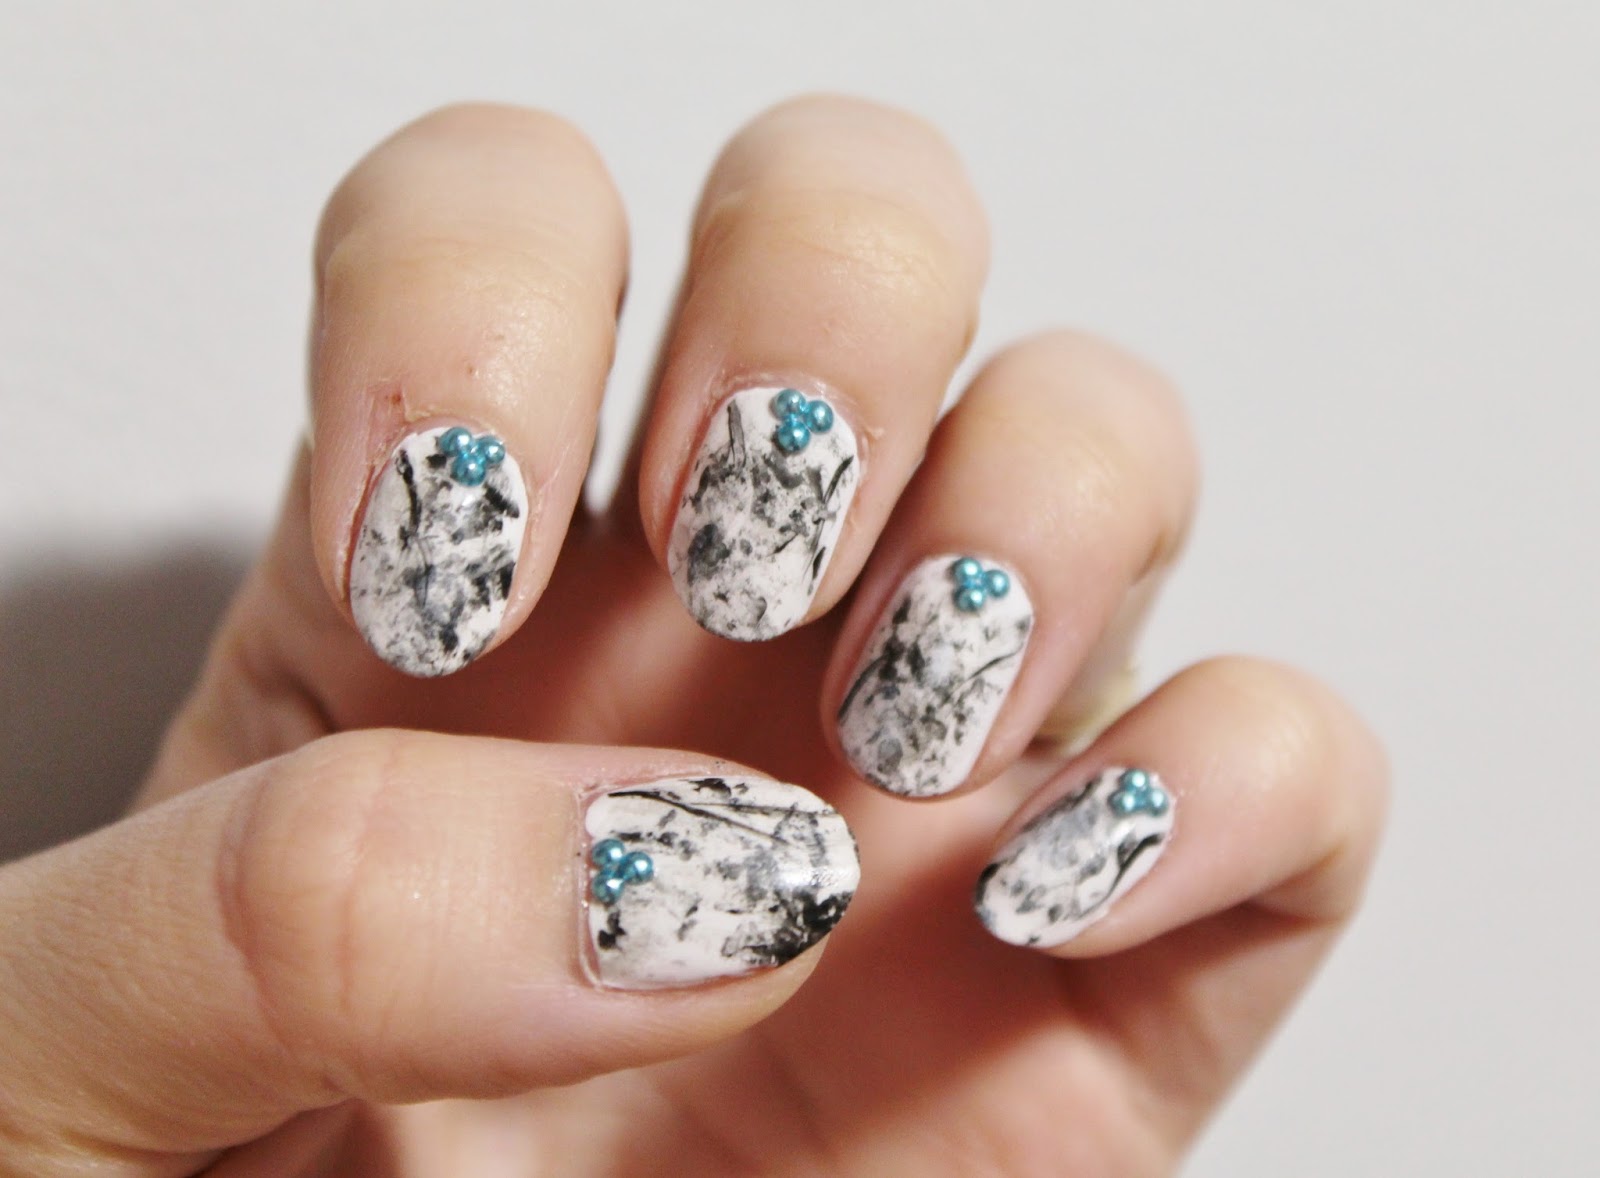 4. 5 Tips for Perfecting Marble Nail Art - wide 3